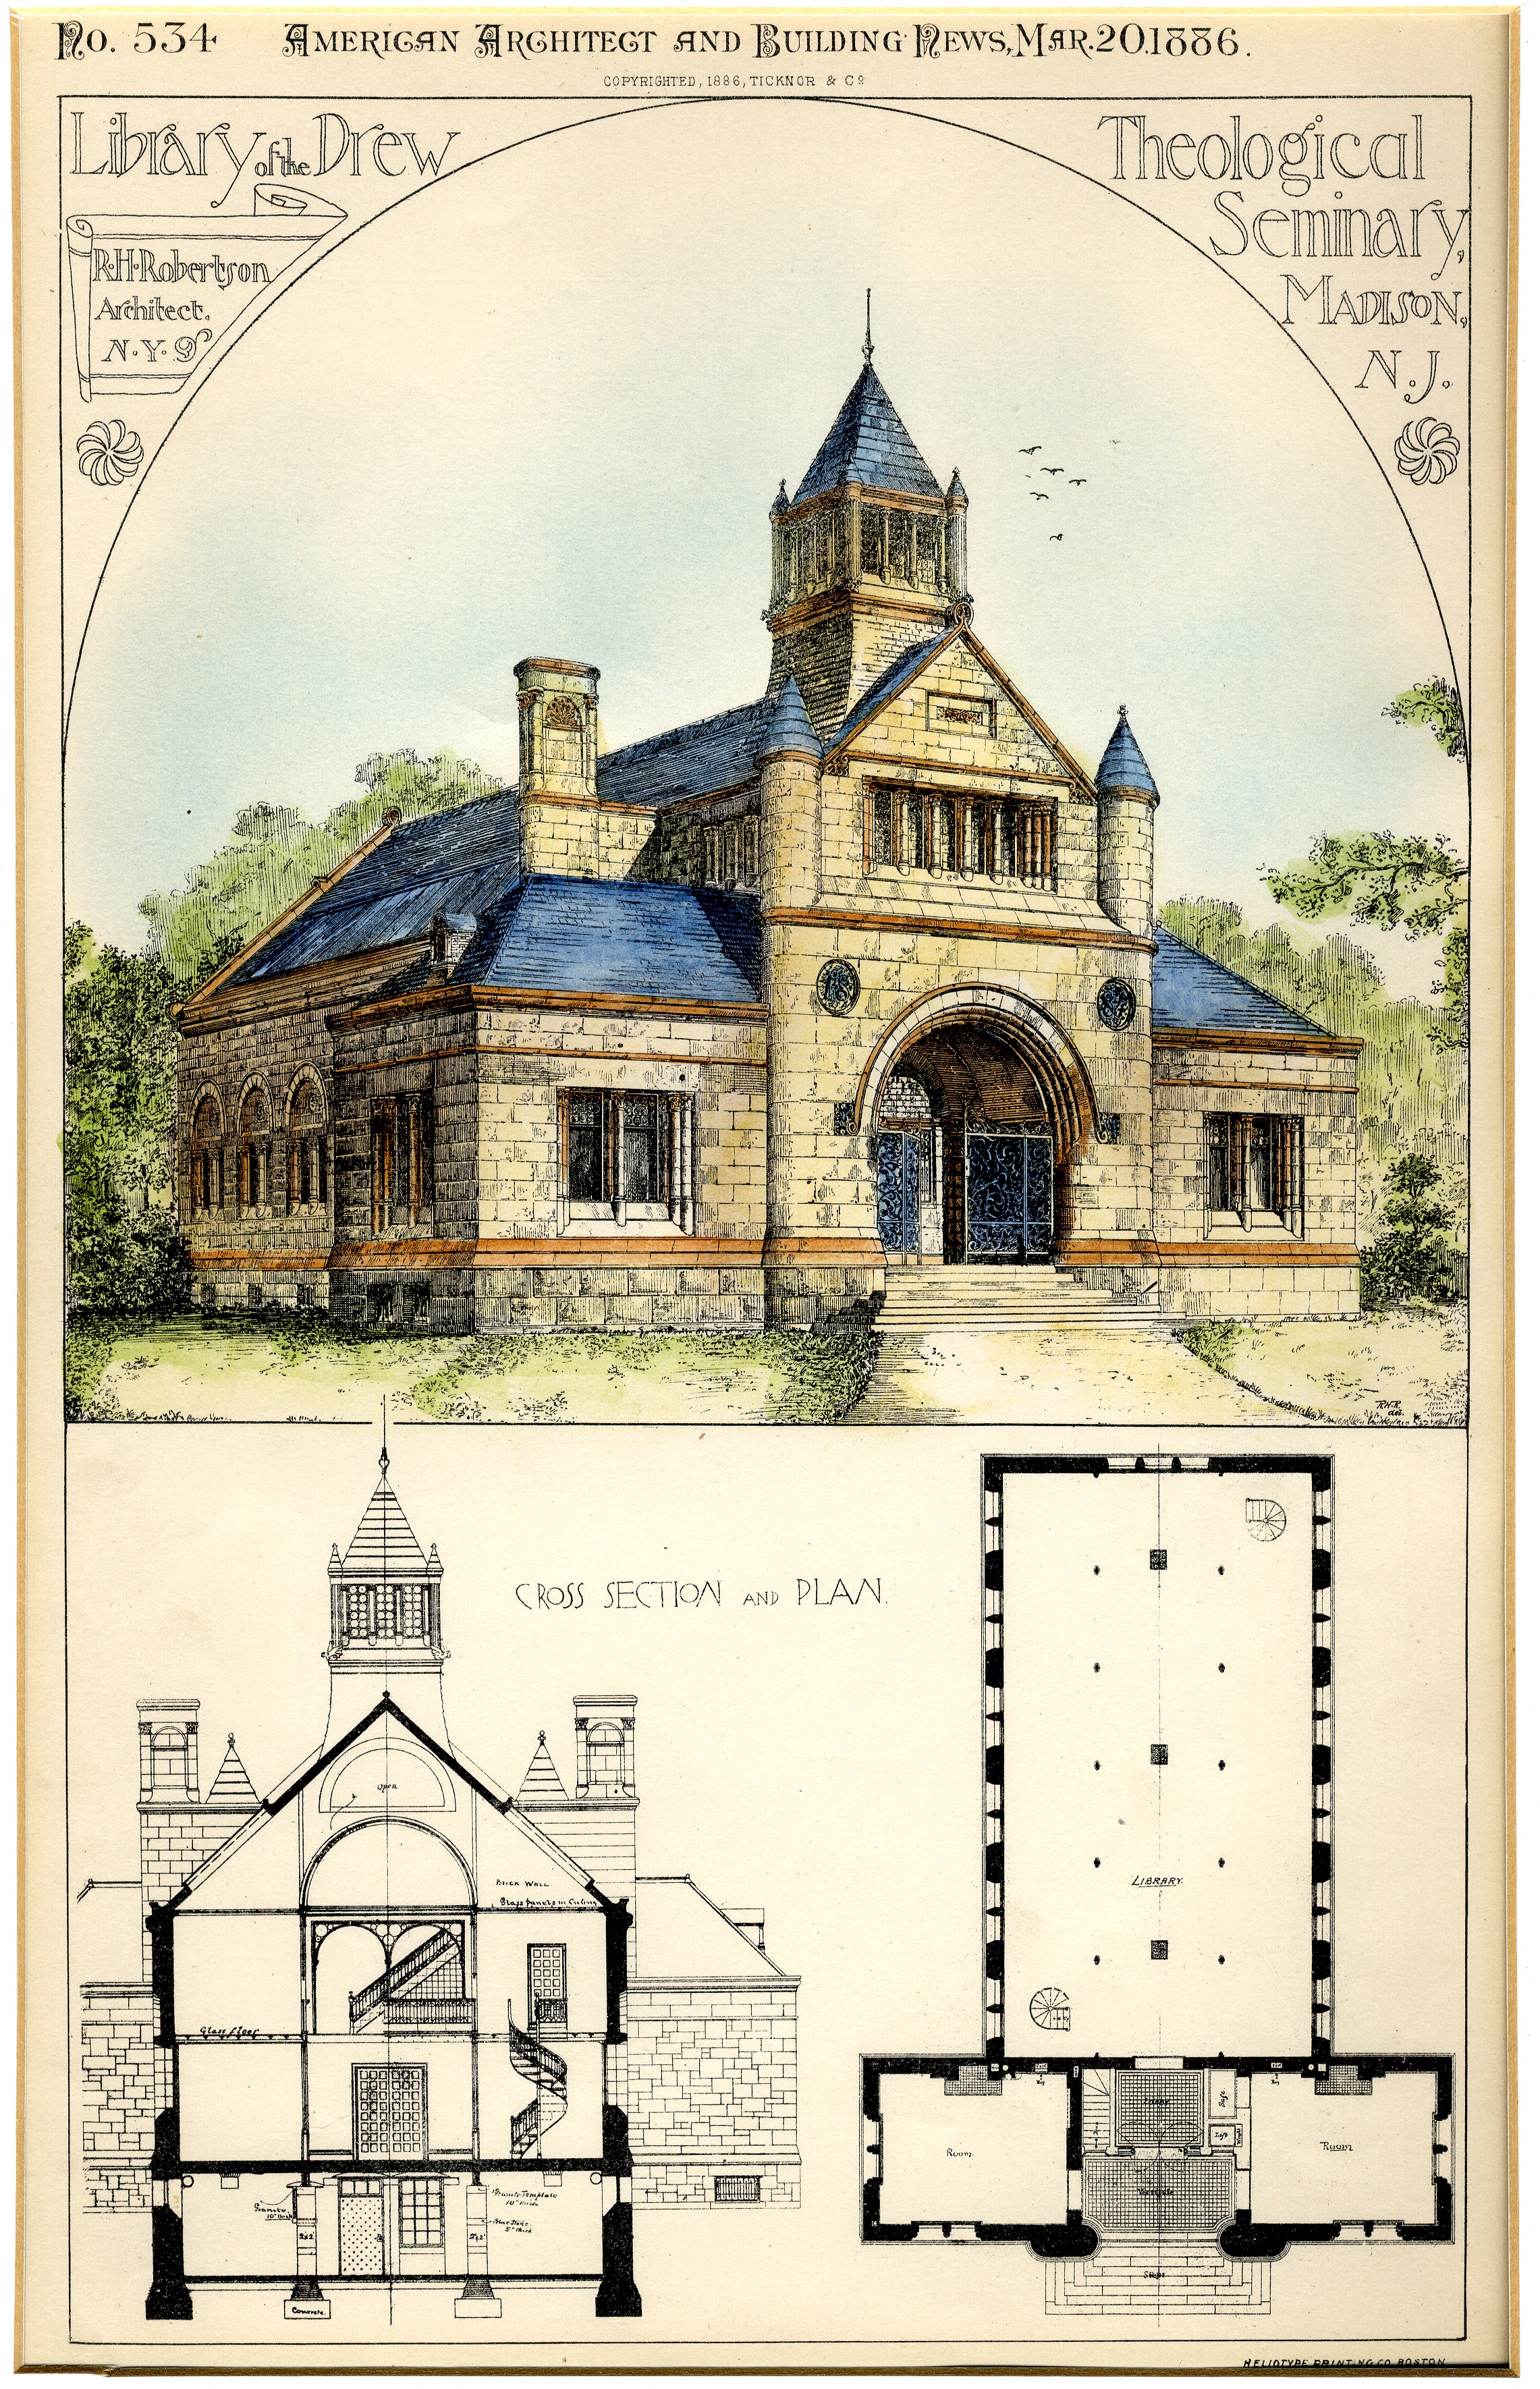 18860320_American Architect and Building News_Cornell Library color illustration